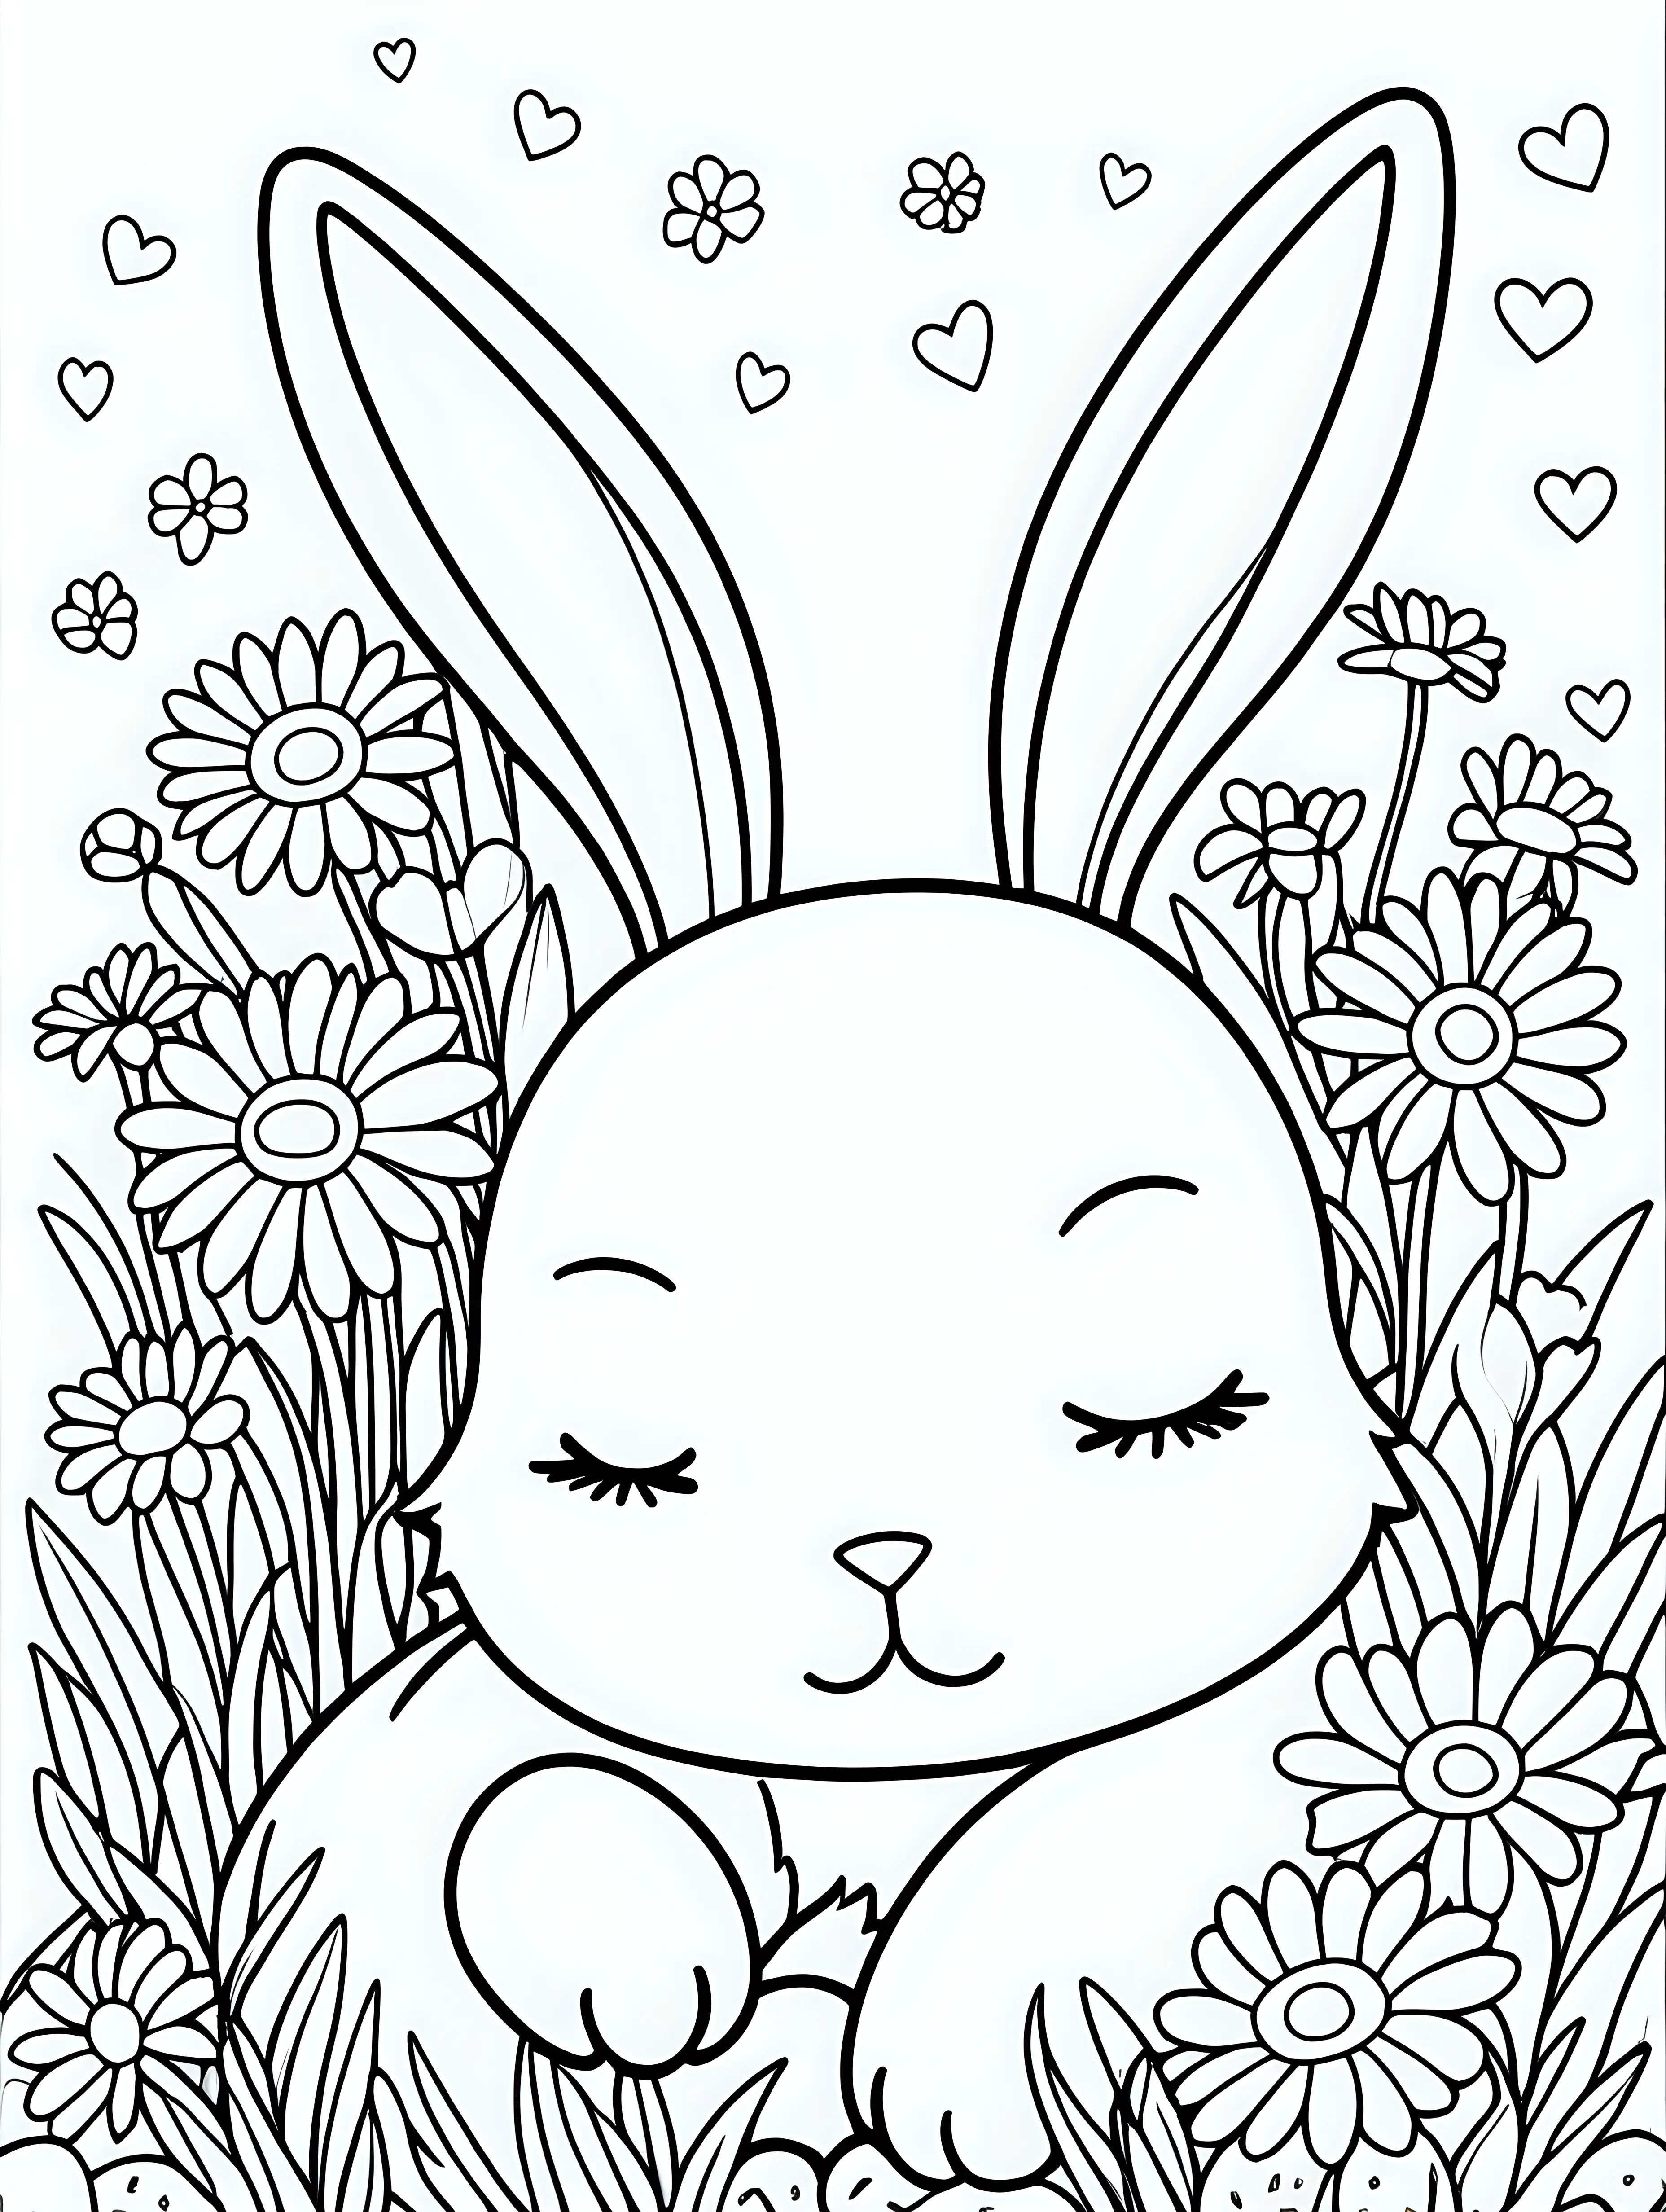 coloring page for kids with a cute kawaii bunny sleeping next to a bush full of daisies, black lines white background, only black and white